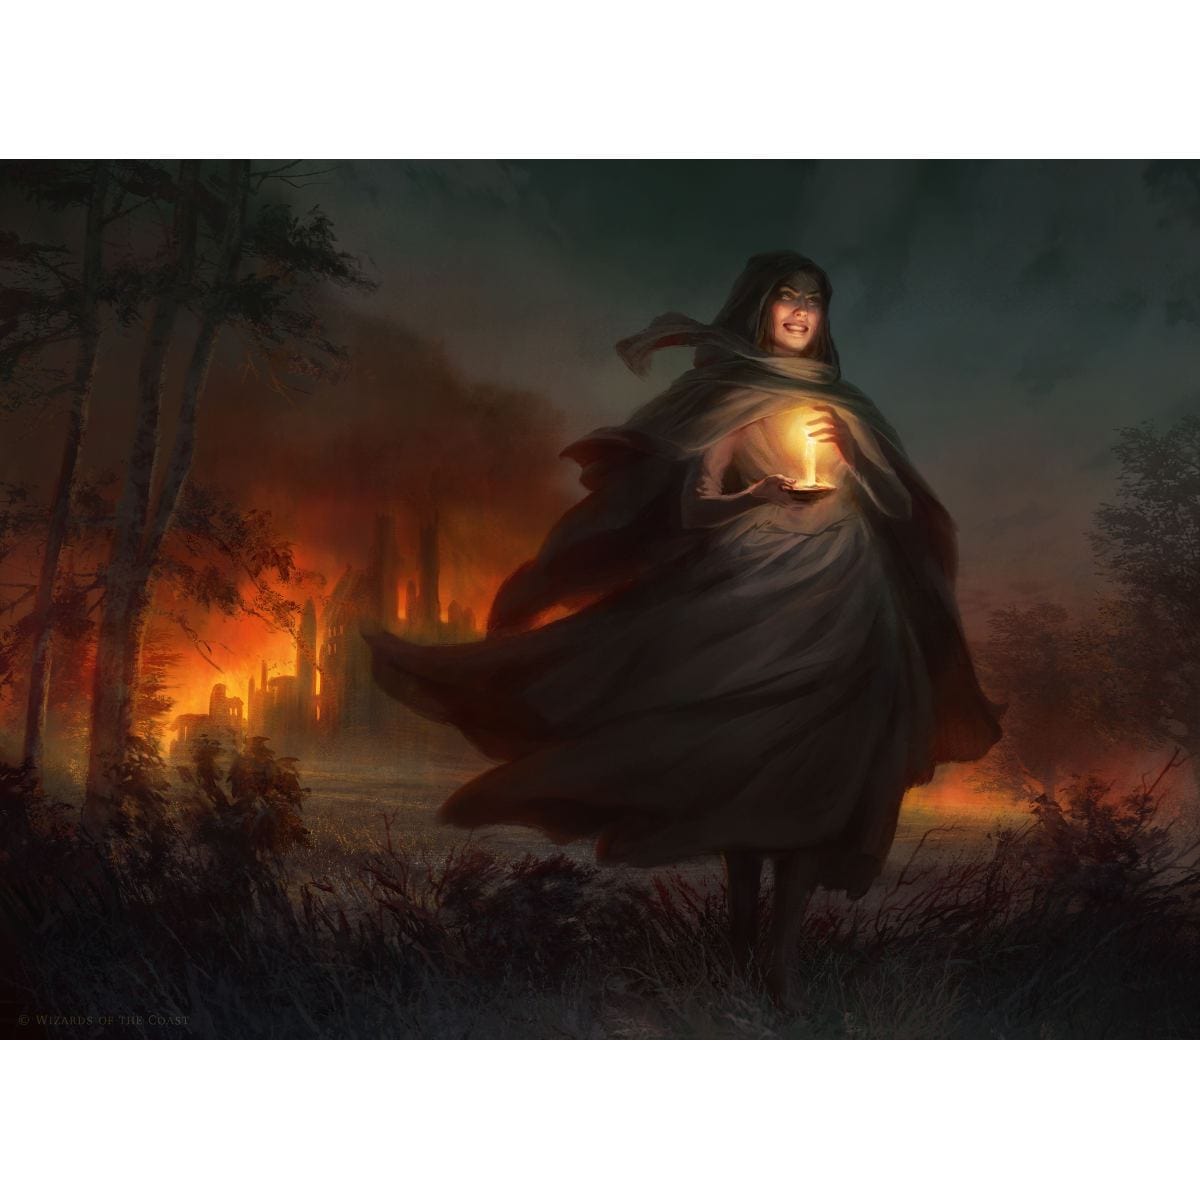 Past in Flames Print - Print - Original Magic Art - Accessories for Magic the Gathering and other card games